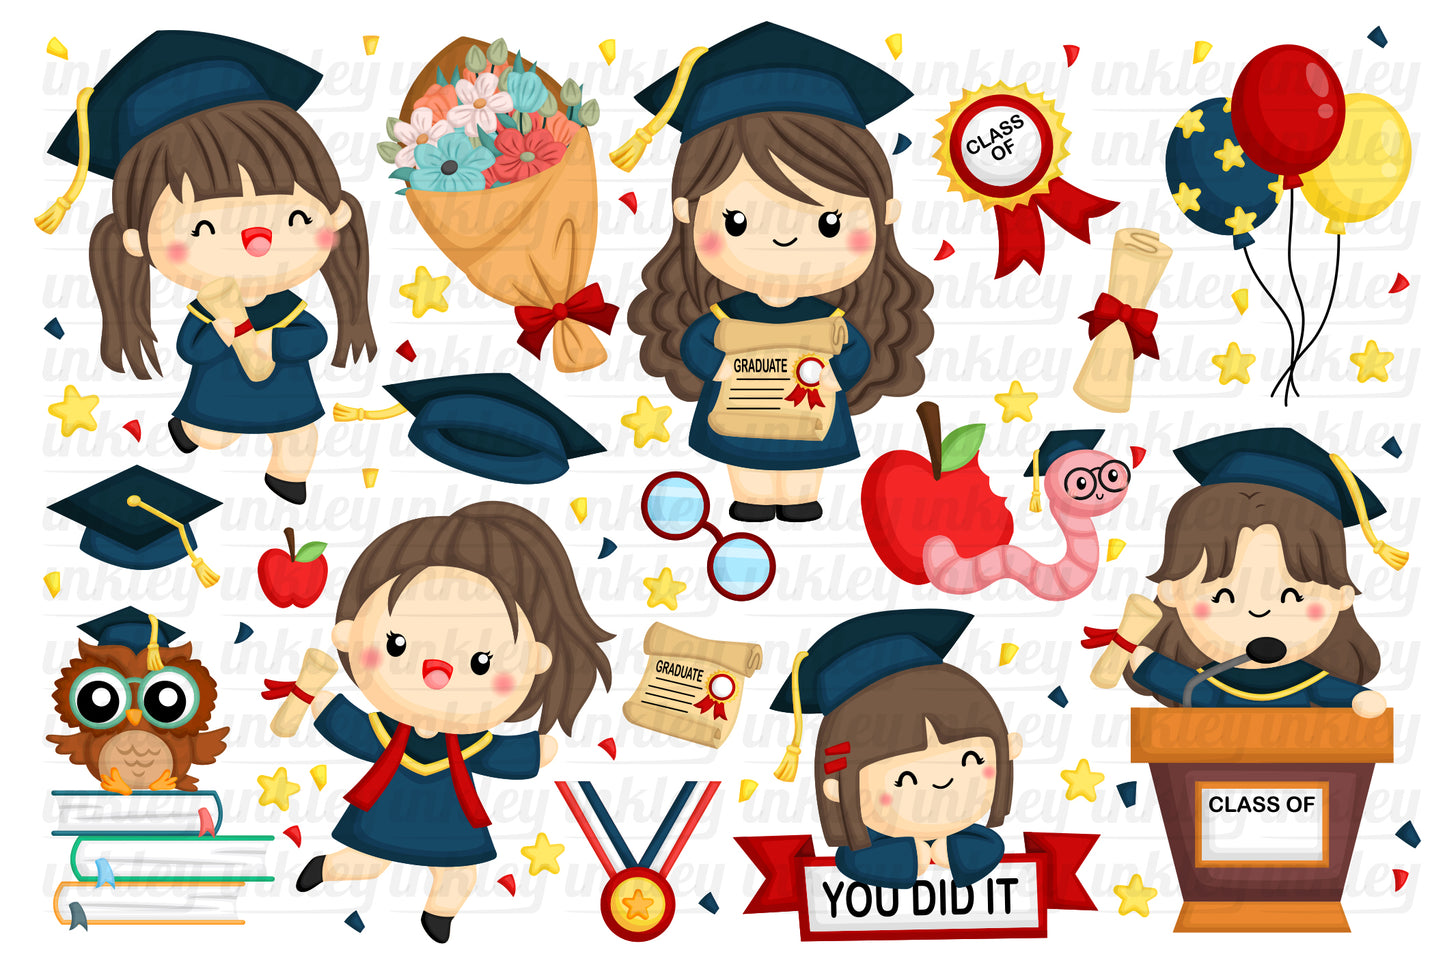 Girl Student and Graduation Clipart - School and University